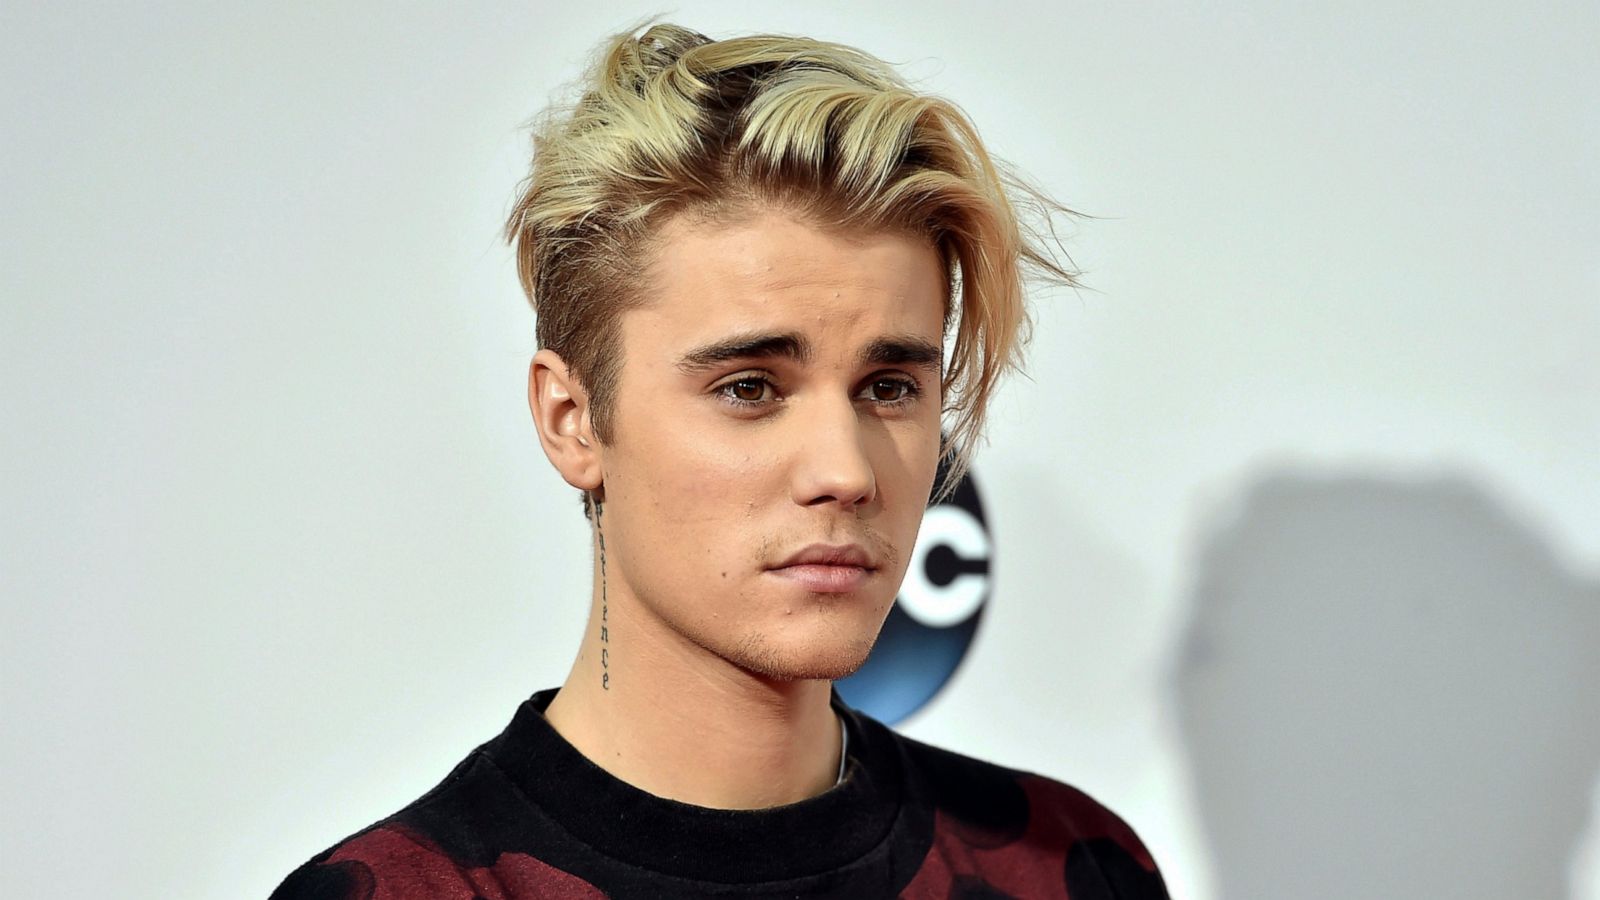 Justin bieber reveals he has lyme disease what to know about the infectious disease